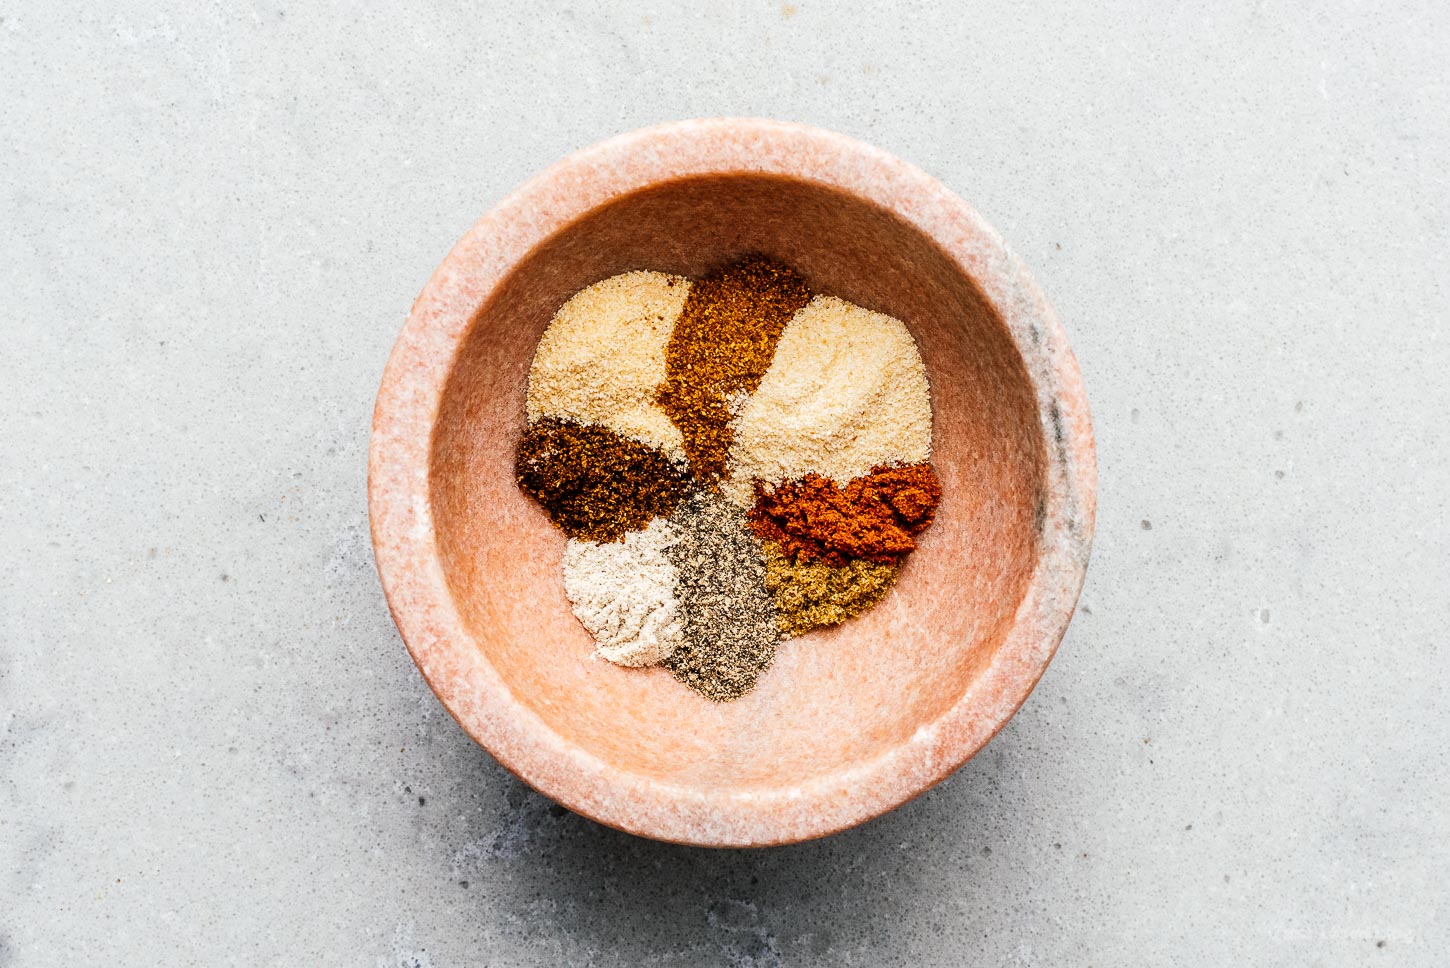 Toast your spices | www.iamafoodblog.com